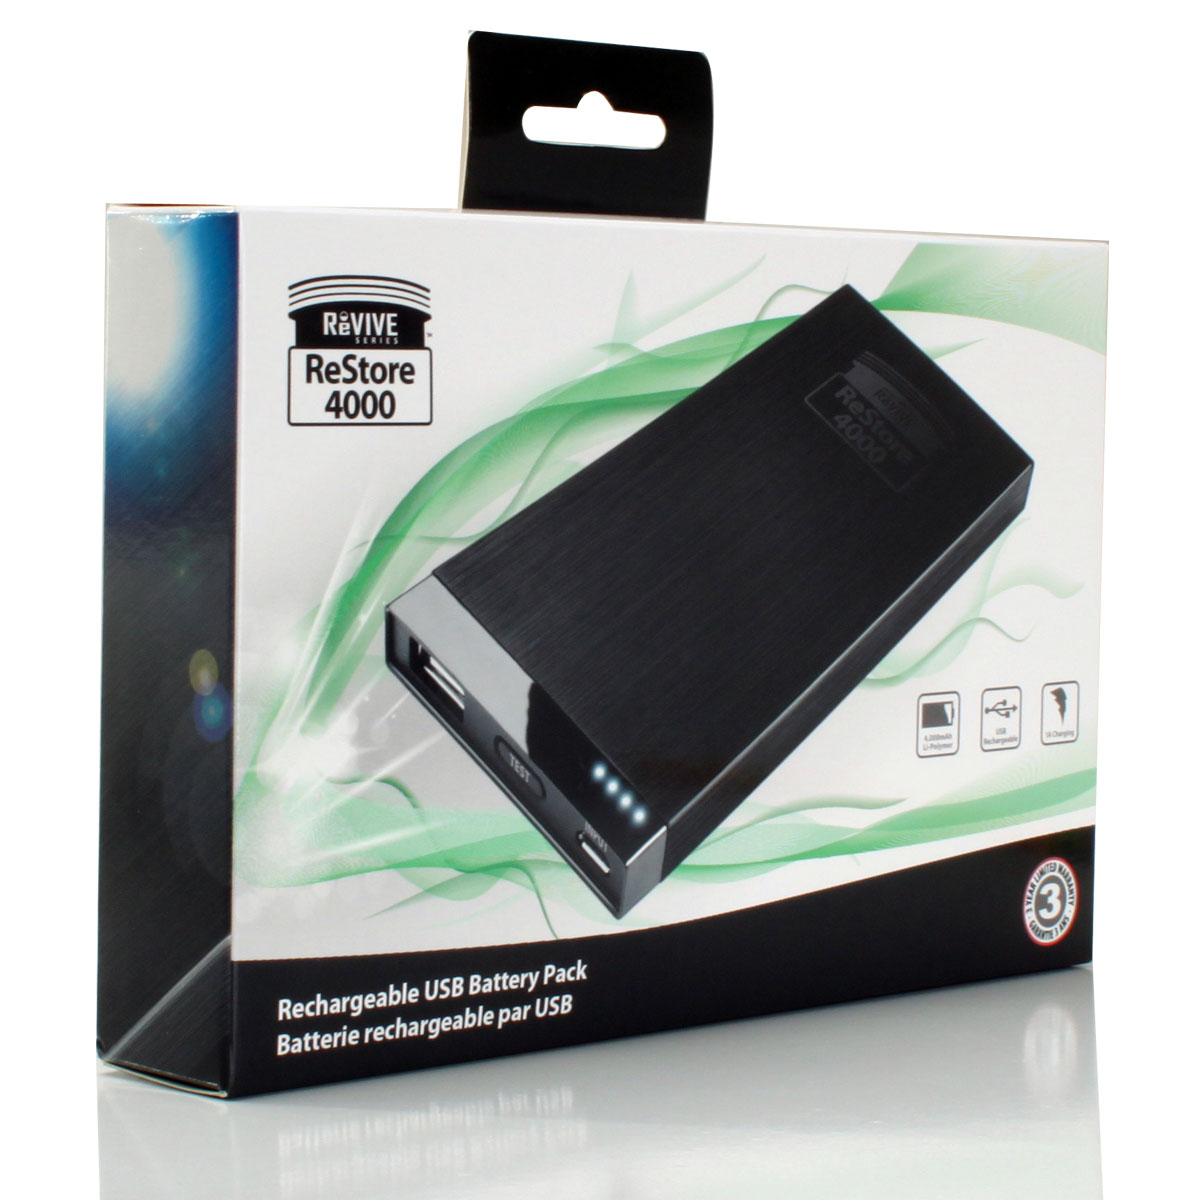 Details about ReVIVE Series ReStore 4000mAh Rechargeable Battery Pack 